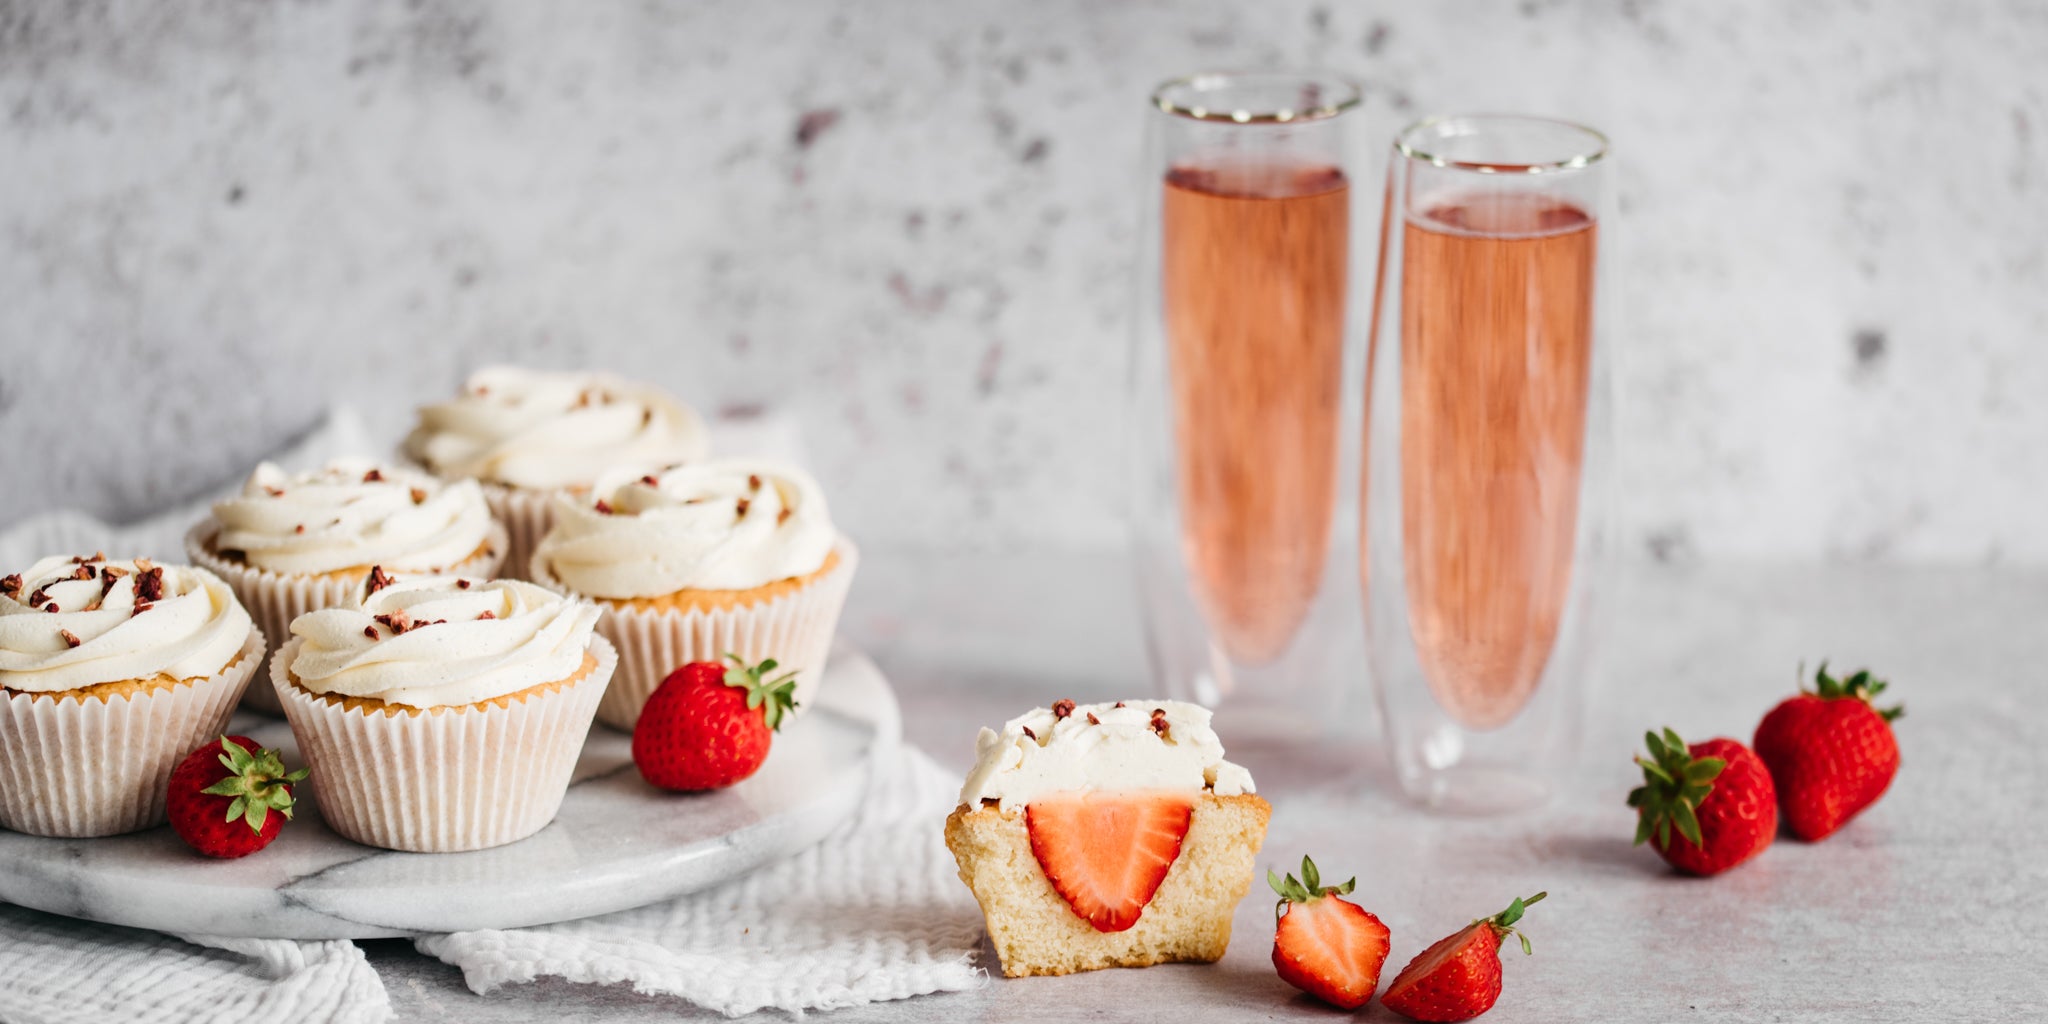 Strawberry & Prosecco Cupcakes next to glasses of fizz